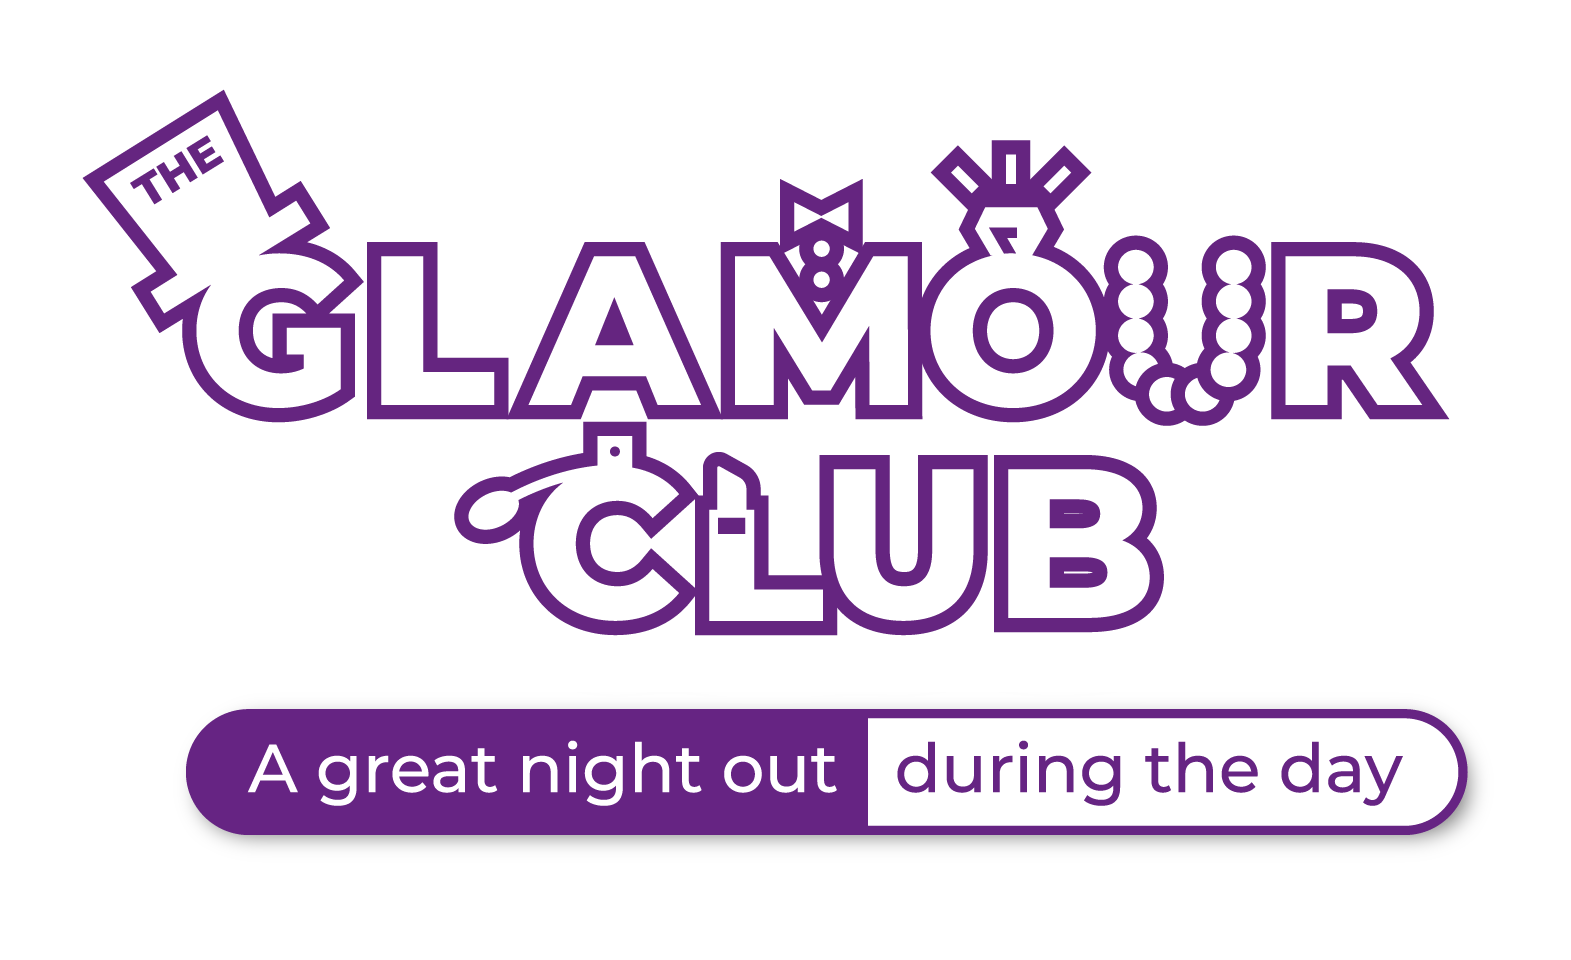 The Glamour Club